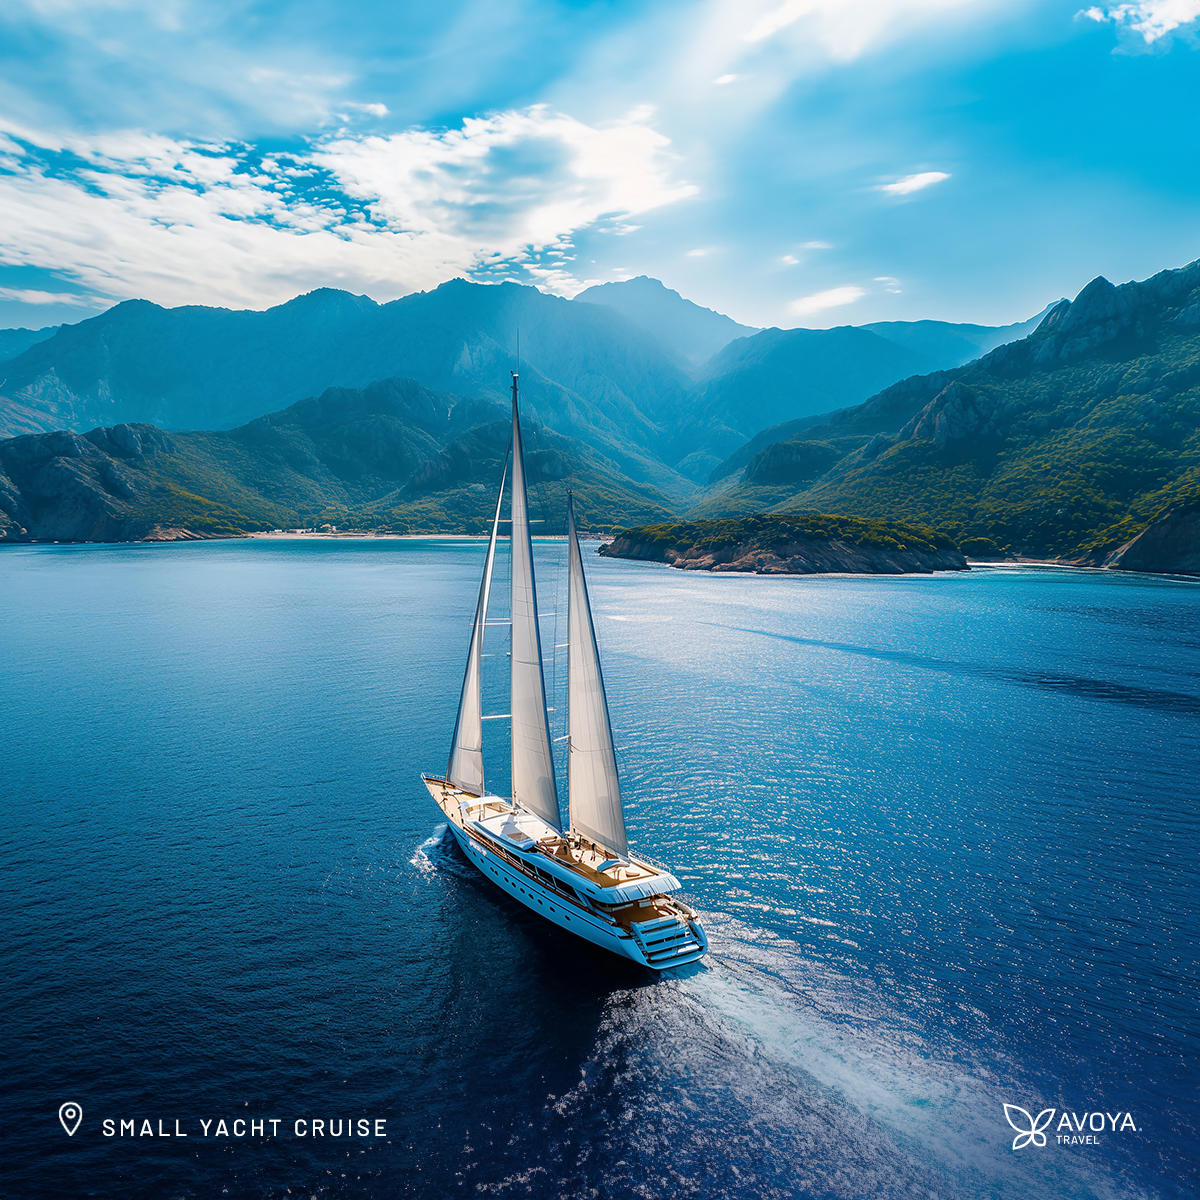 Ready for an impromptu #summer #adventure? Whether you’re looking for a River Cruise, Ocean Cruise, Expedition Cruise, or Small Yacht Cruise, we have #LastMinute #CruiseDeals waiting just for you. Follow the link to browse today! #Cruise
bit.ly/3Wrsu9F